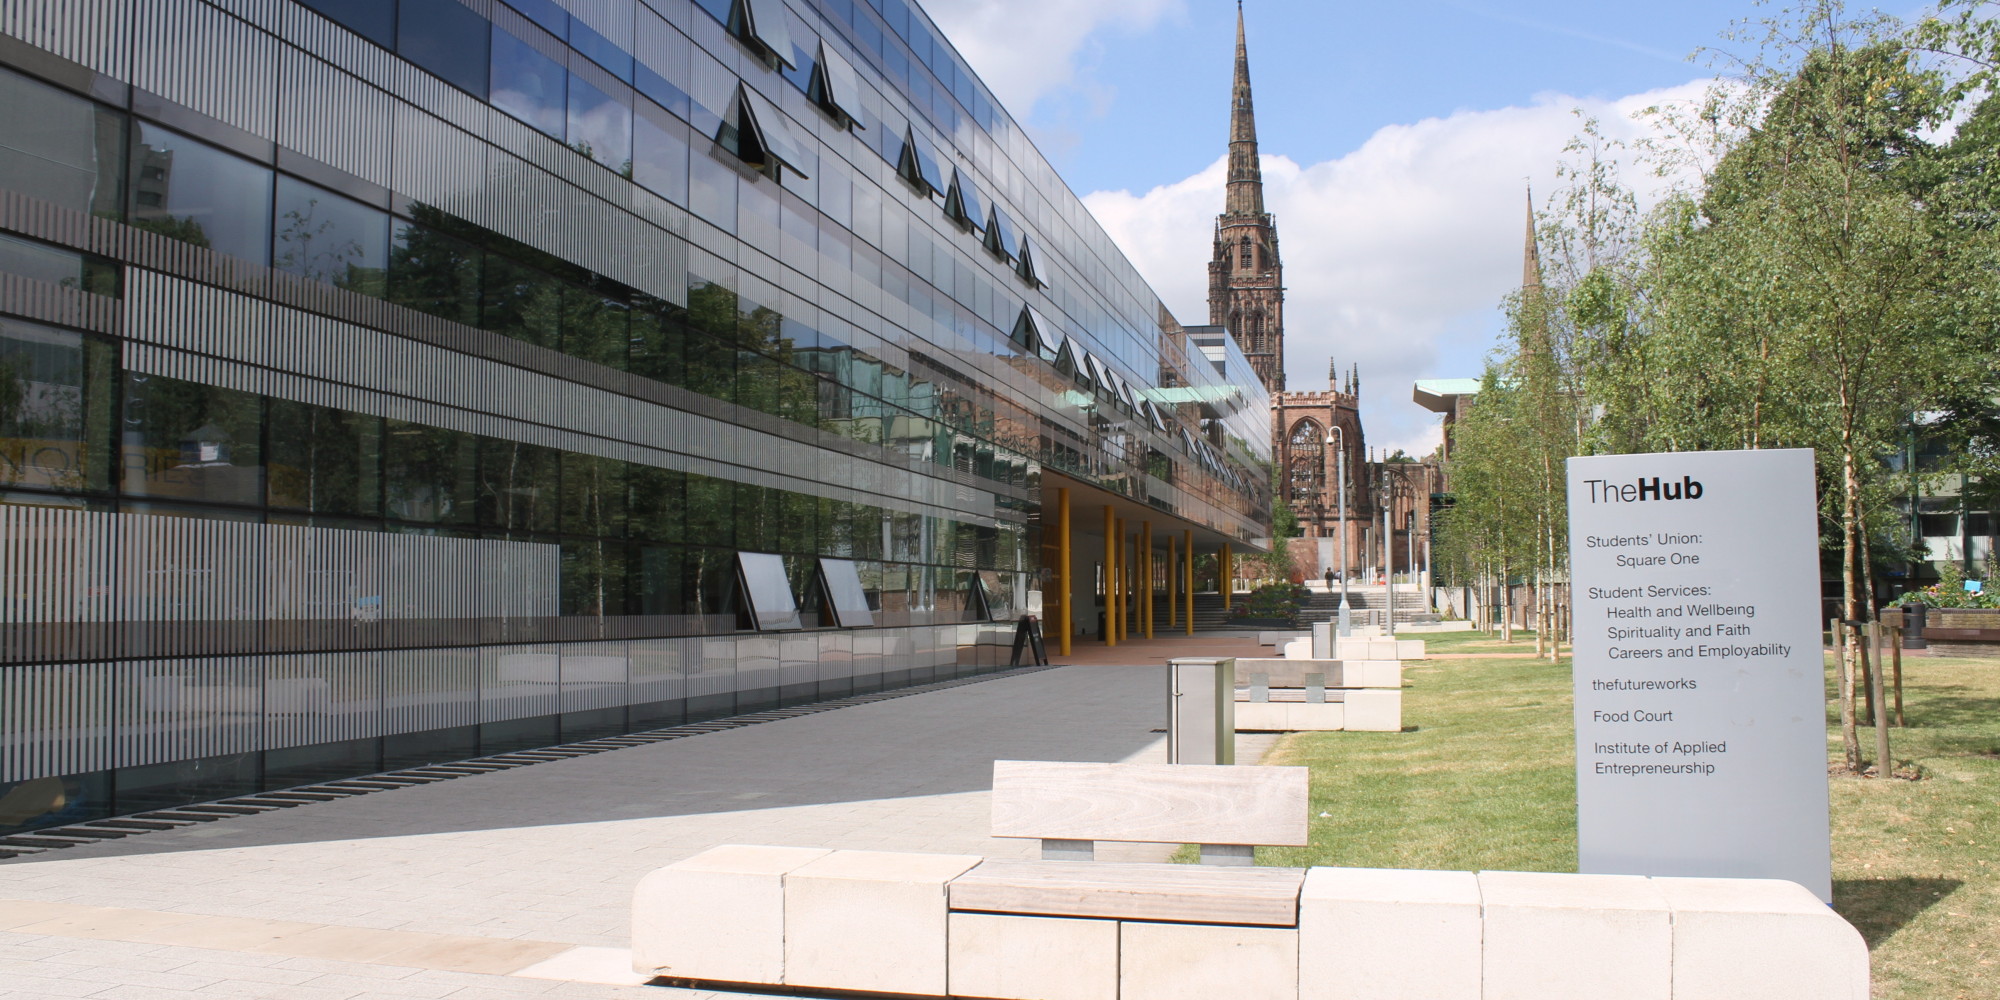 coventry university pips russell group institutions to make it into top 20 in universities